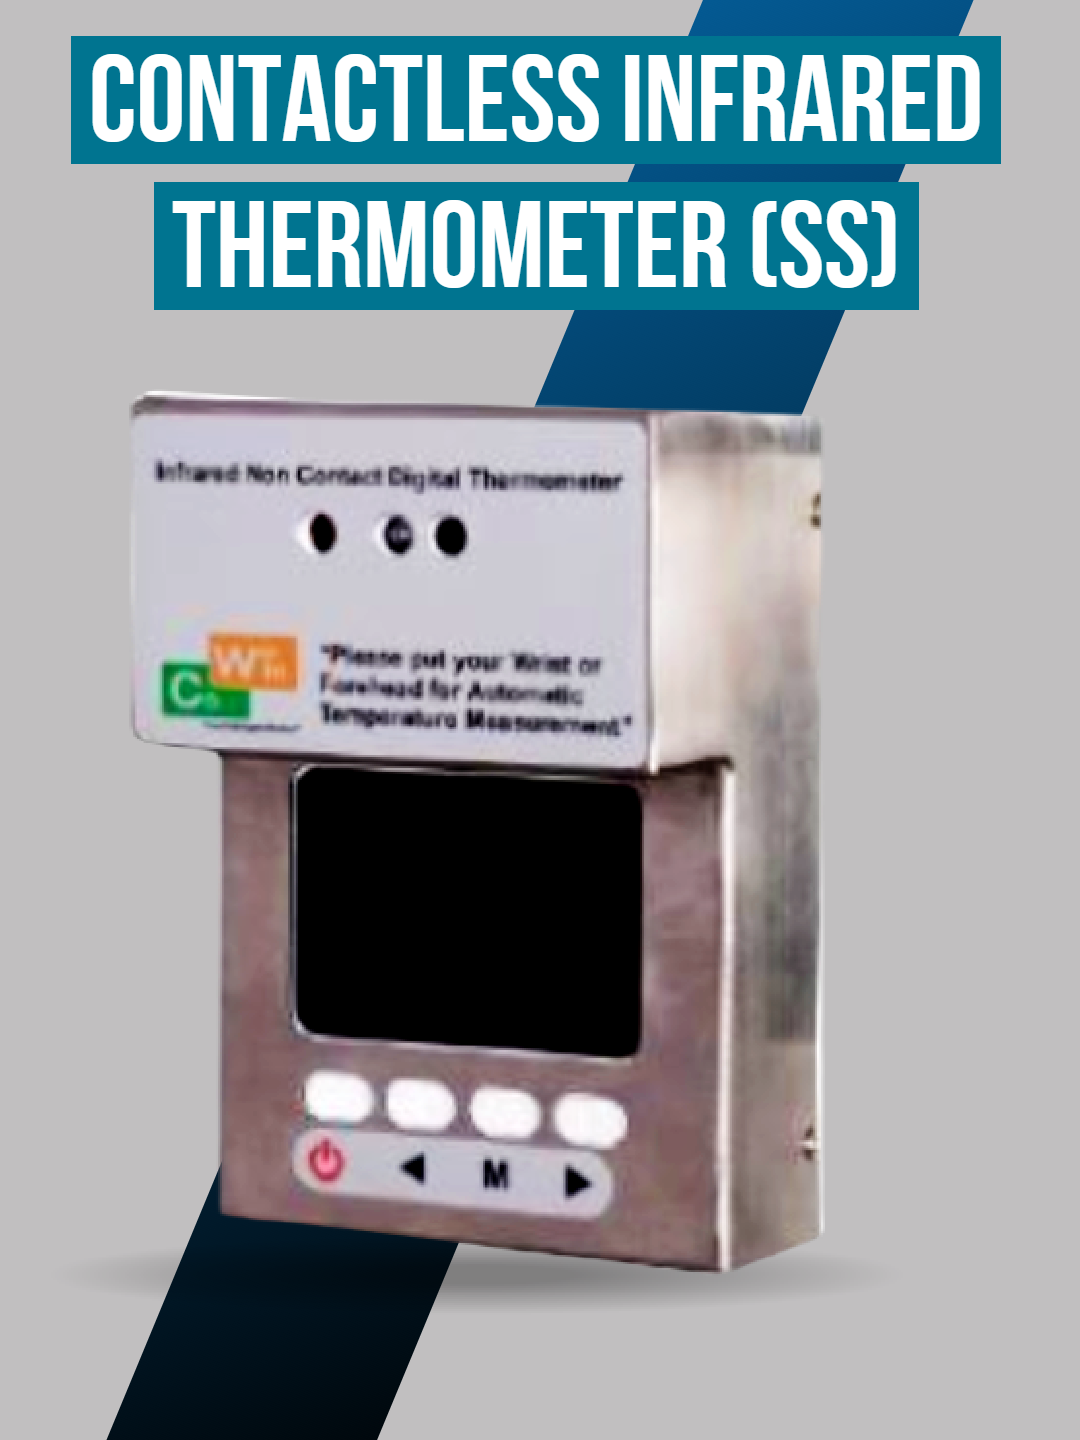 Contactless Infrared Thermometer (SS)